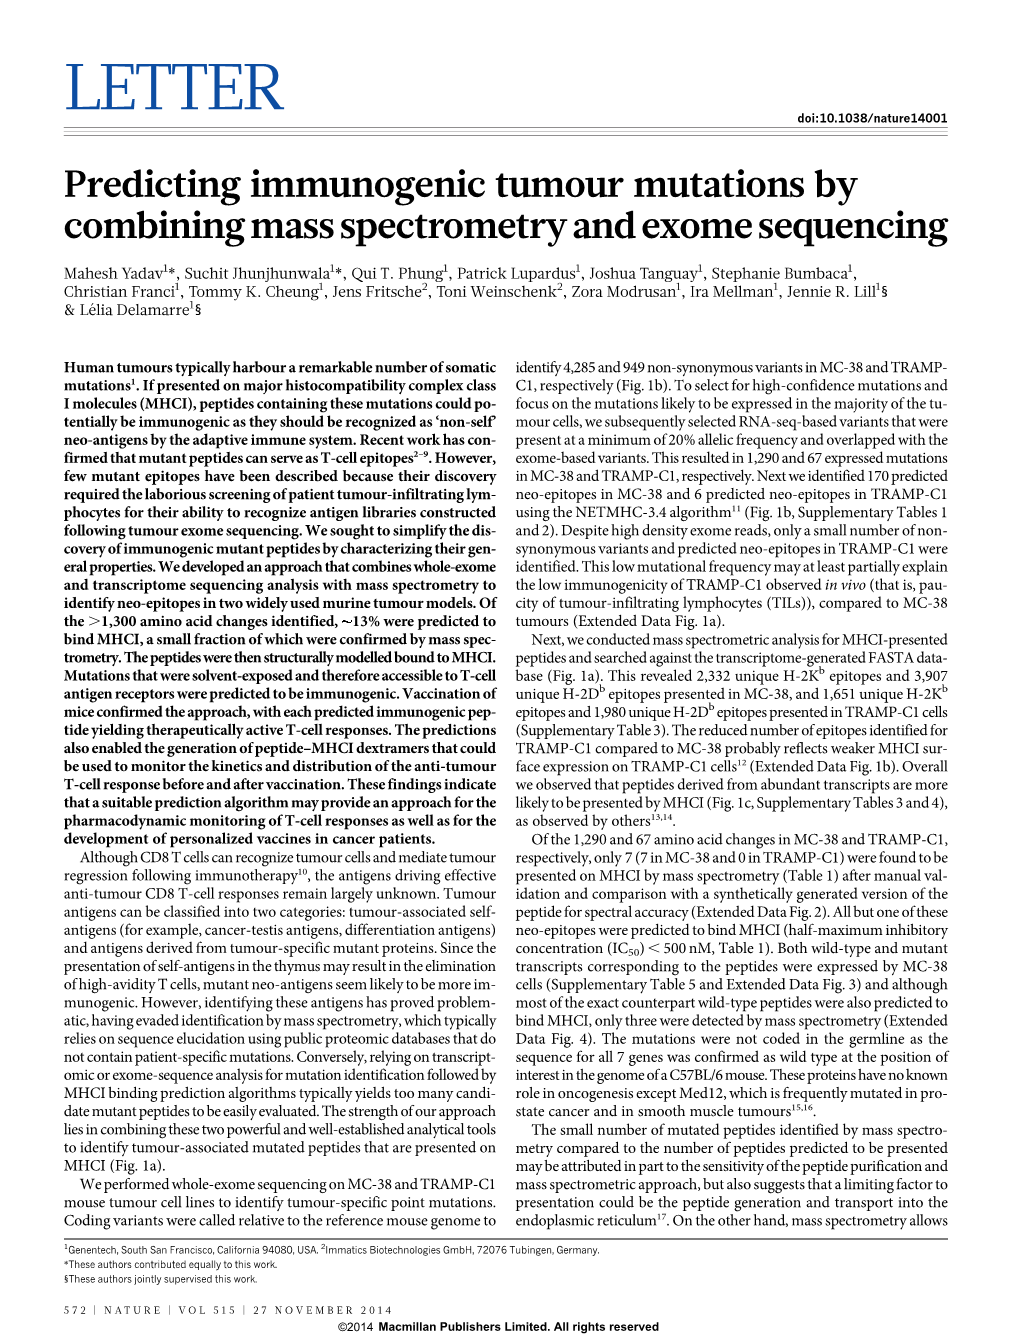 Predicting Immunogenic Tumour Mutations by Combining Mass Spectrometry and Exome Sequencing